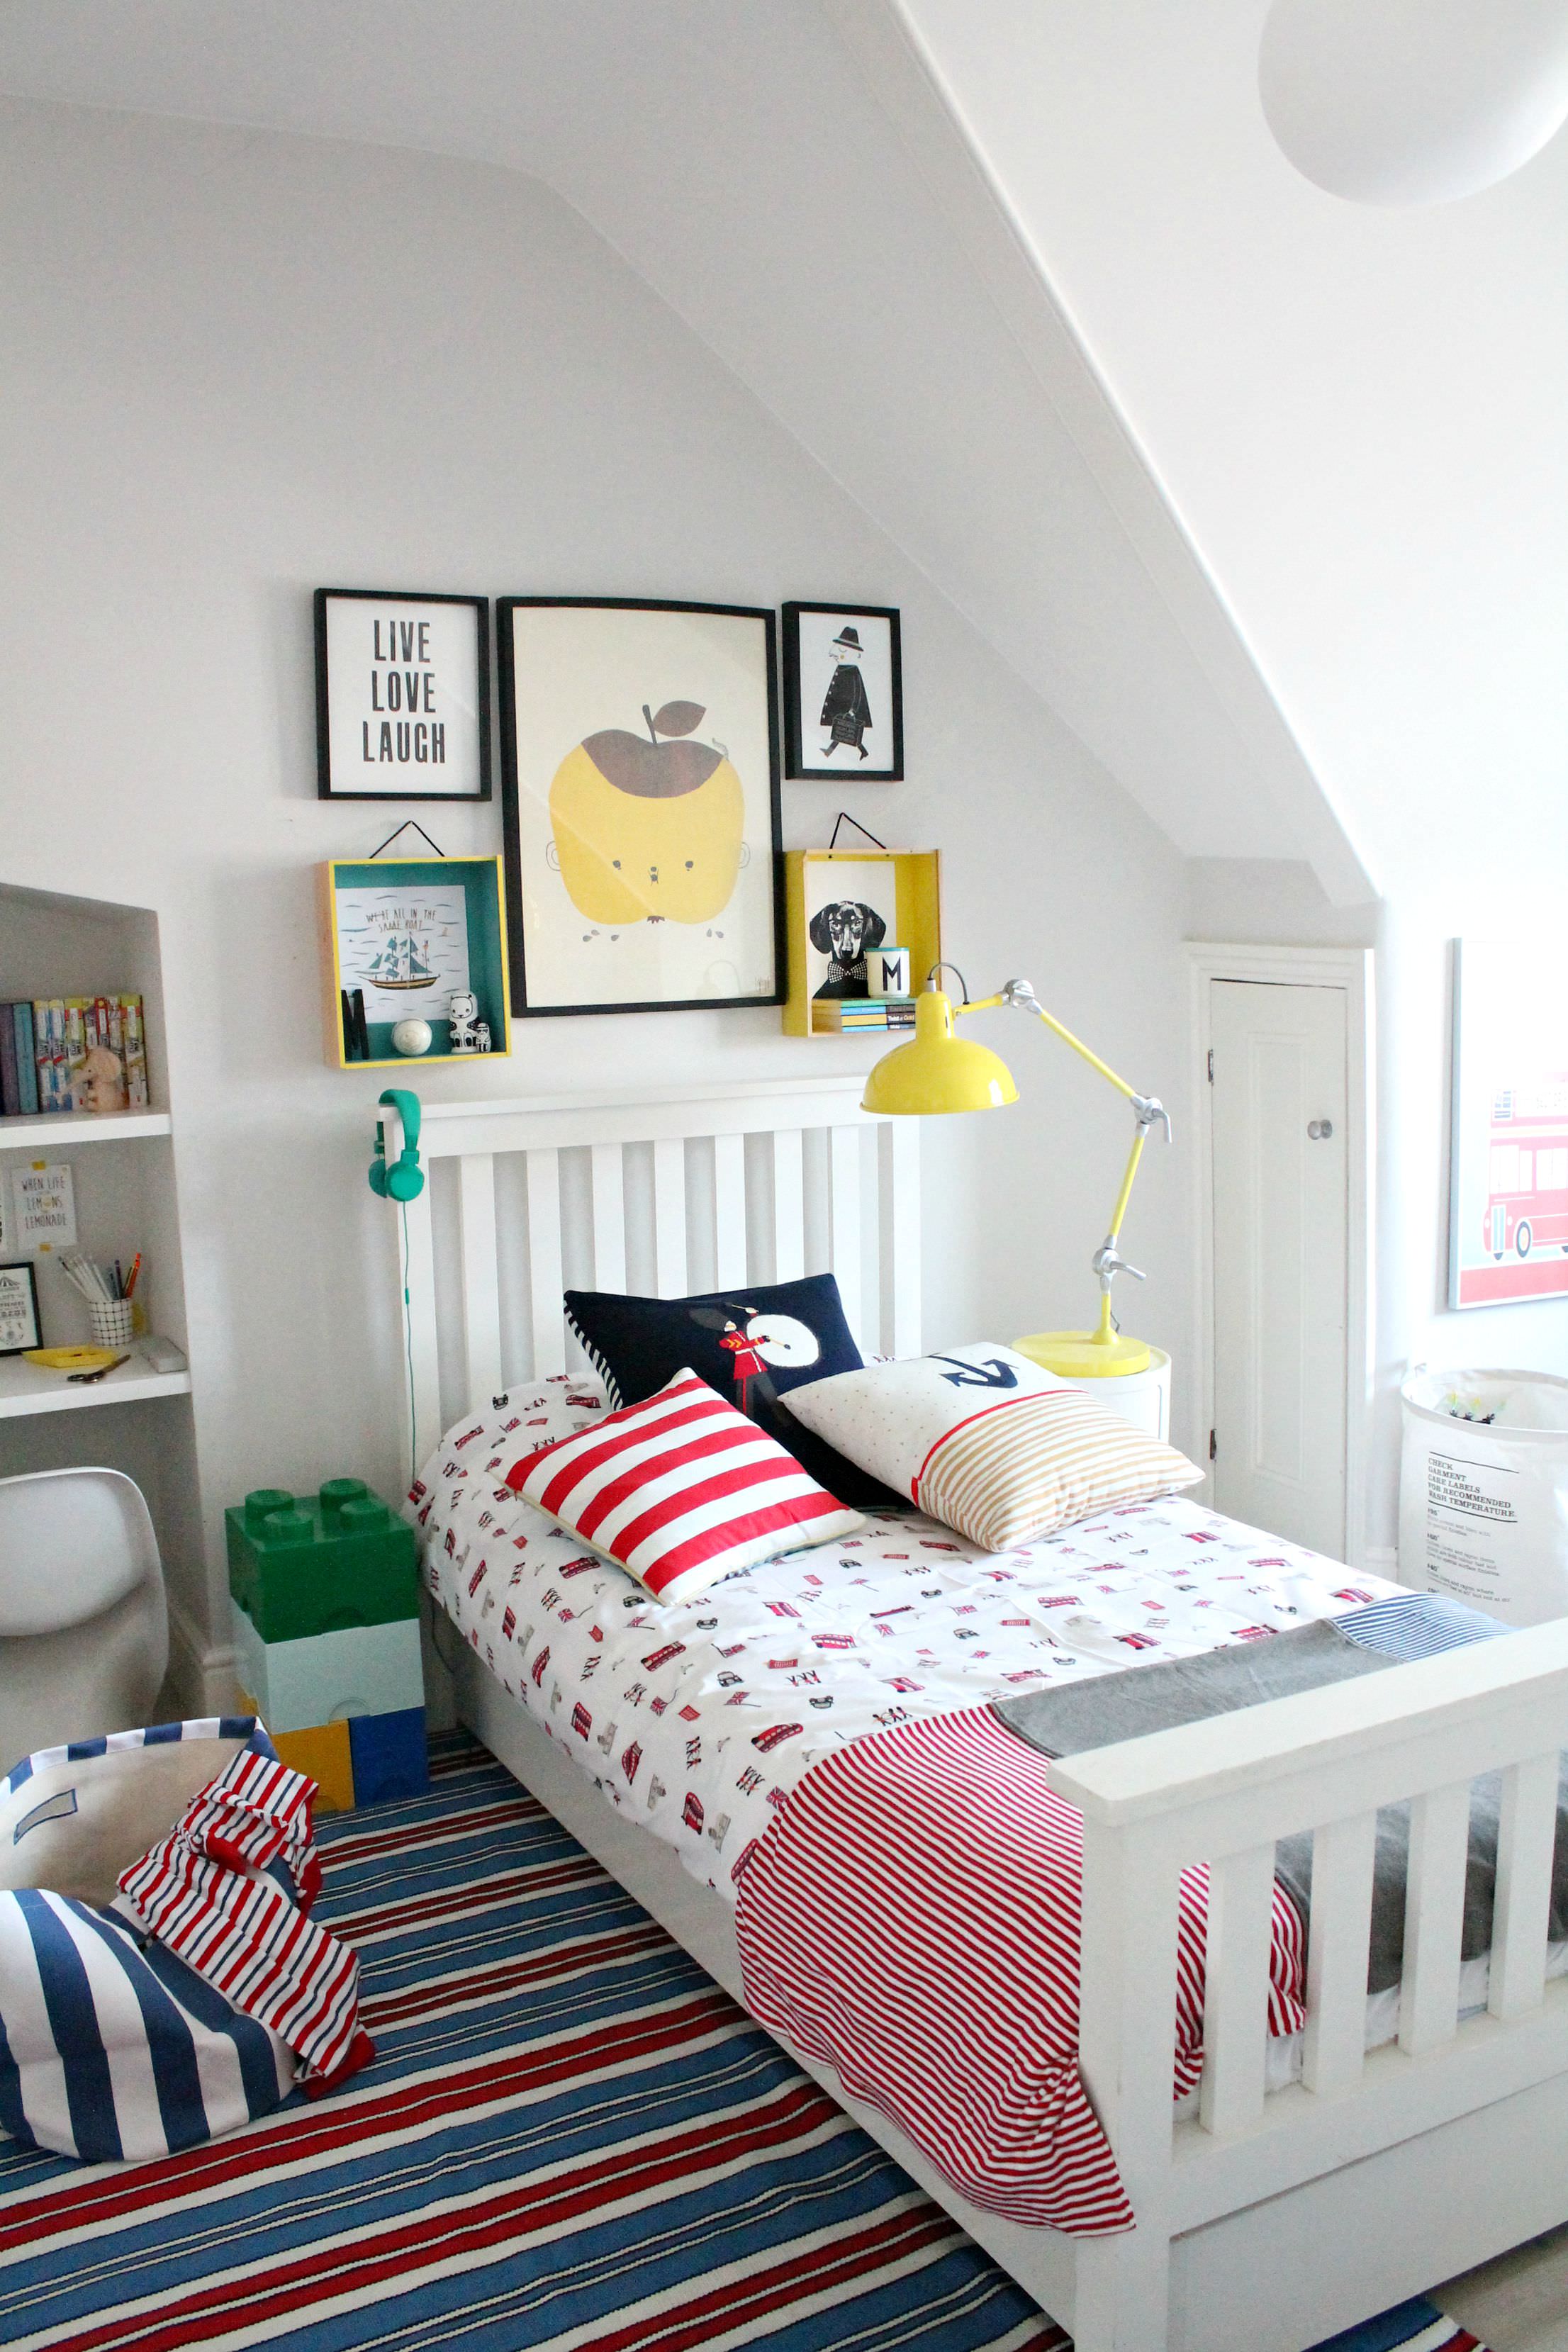 littleBIGBELL Boy's bedroom Ideas. Decorating with a rug from Little P.